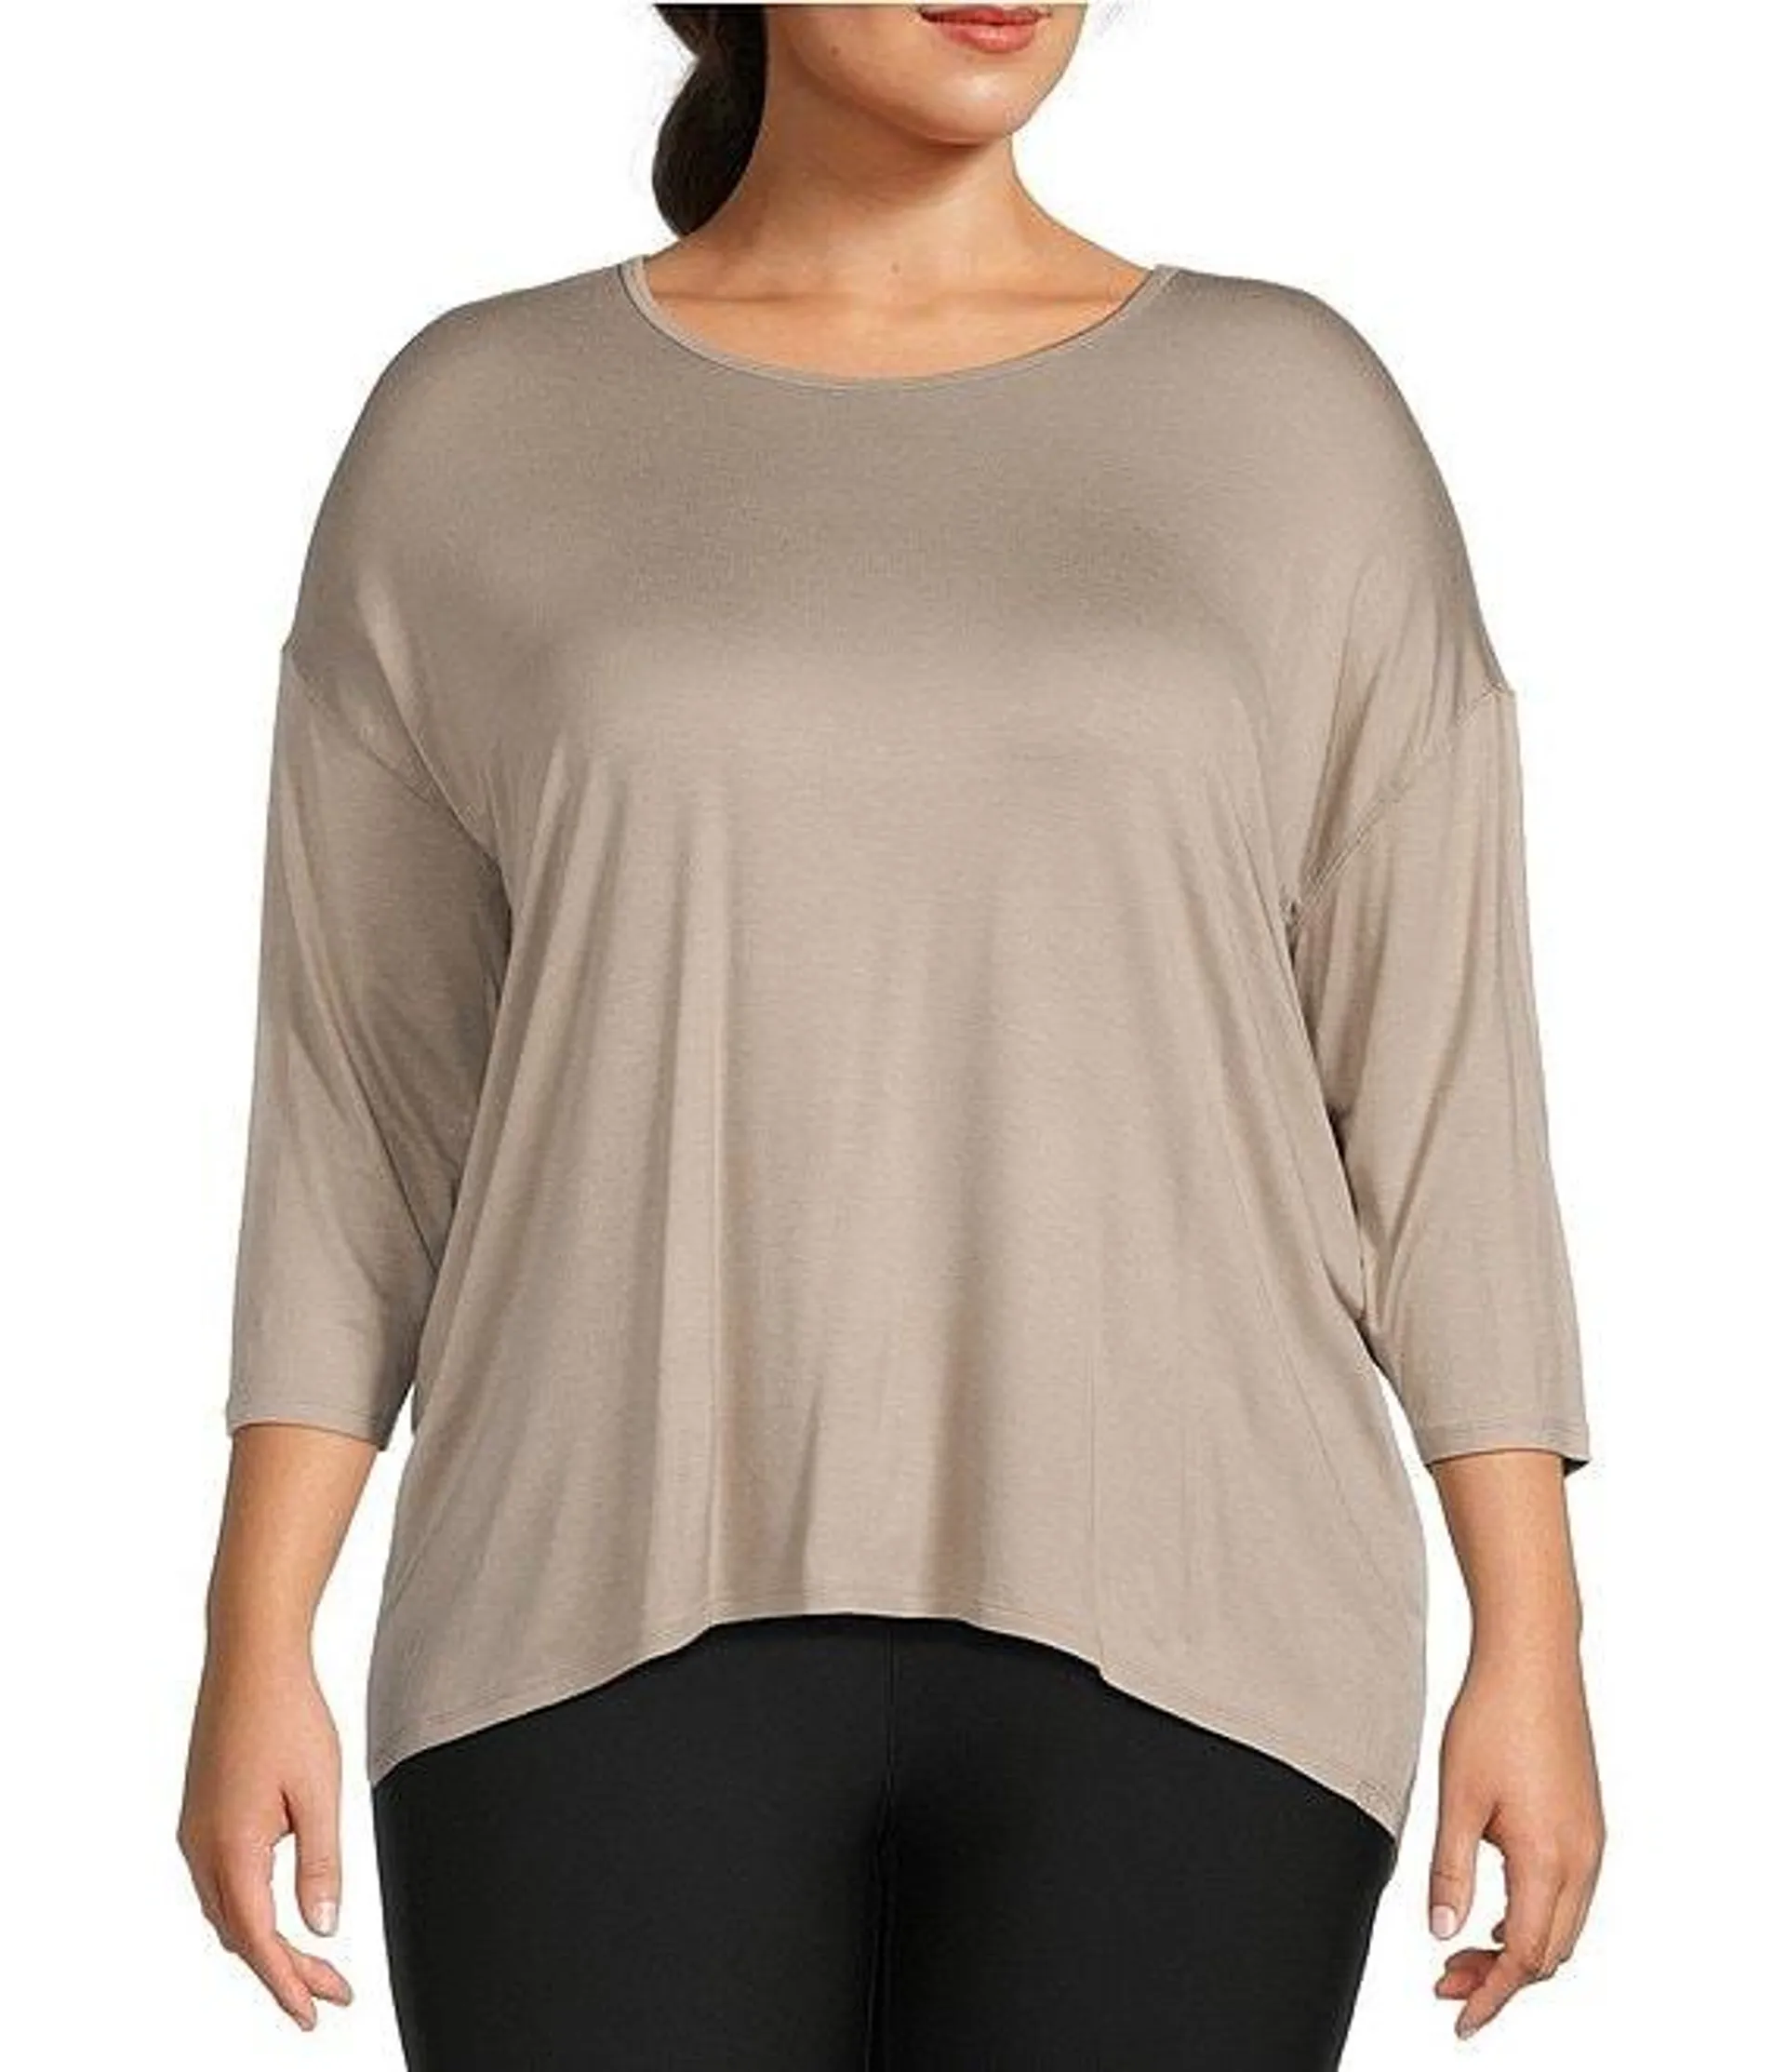 Plus Size Knit 3/4 Sleeve Perfect Tee